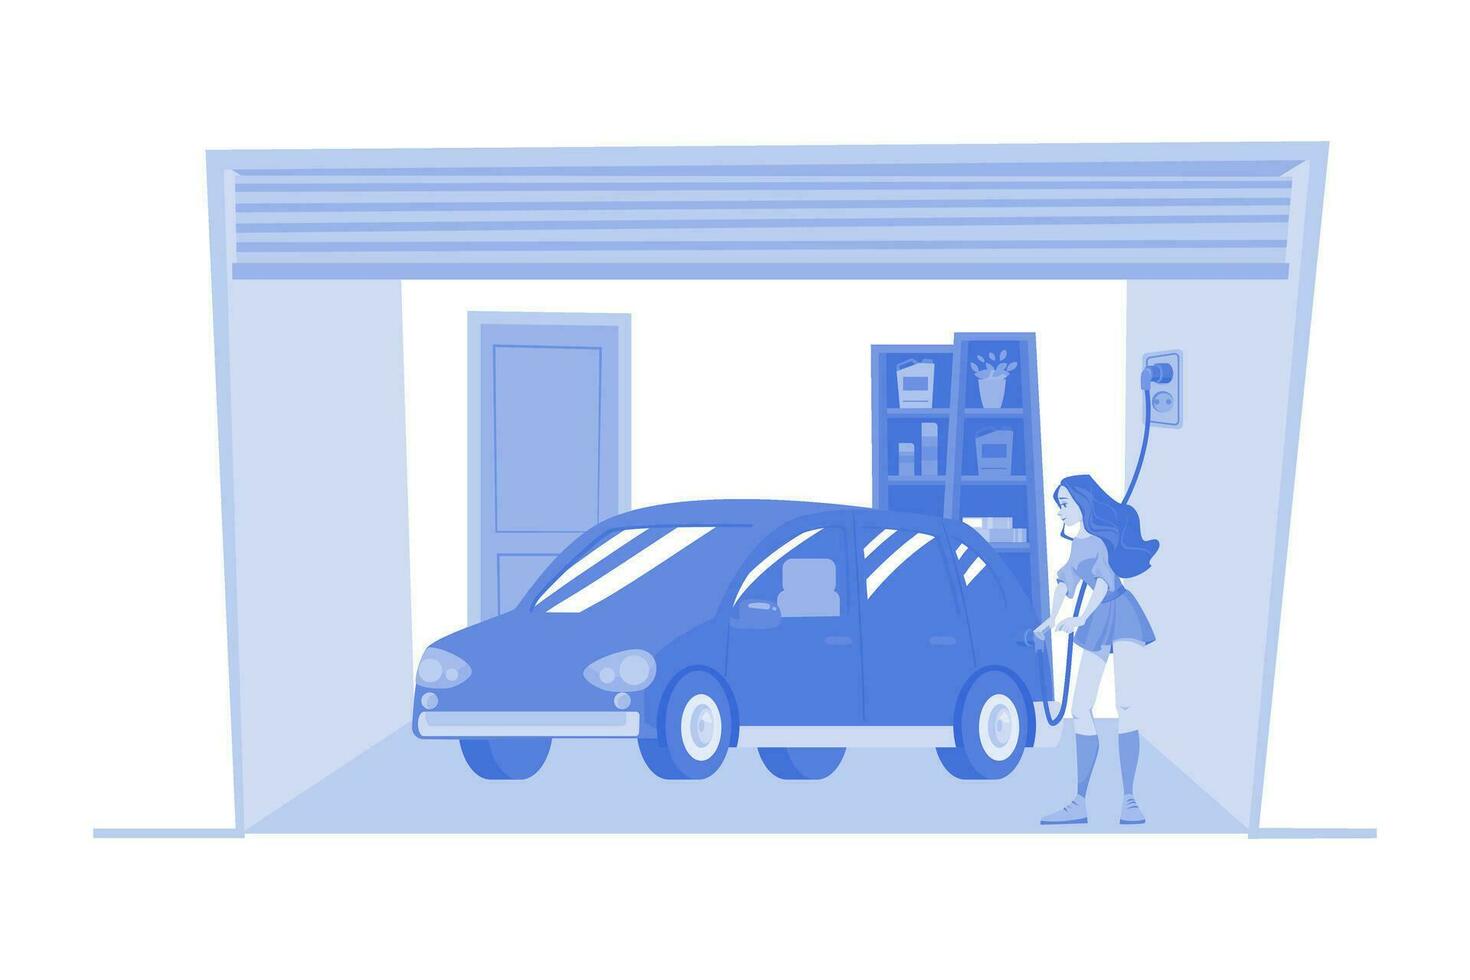 Woman Charging An Electric Car At Home vector